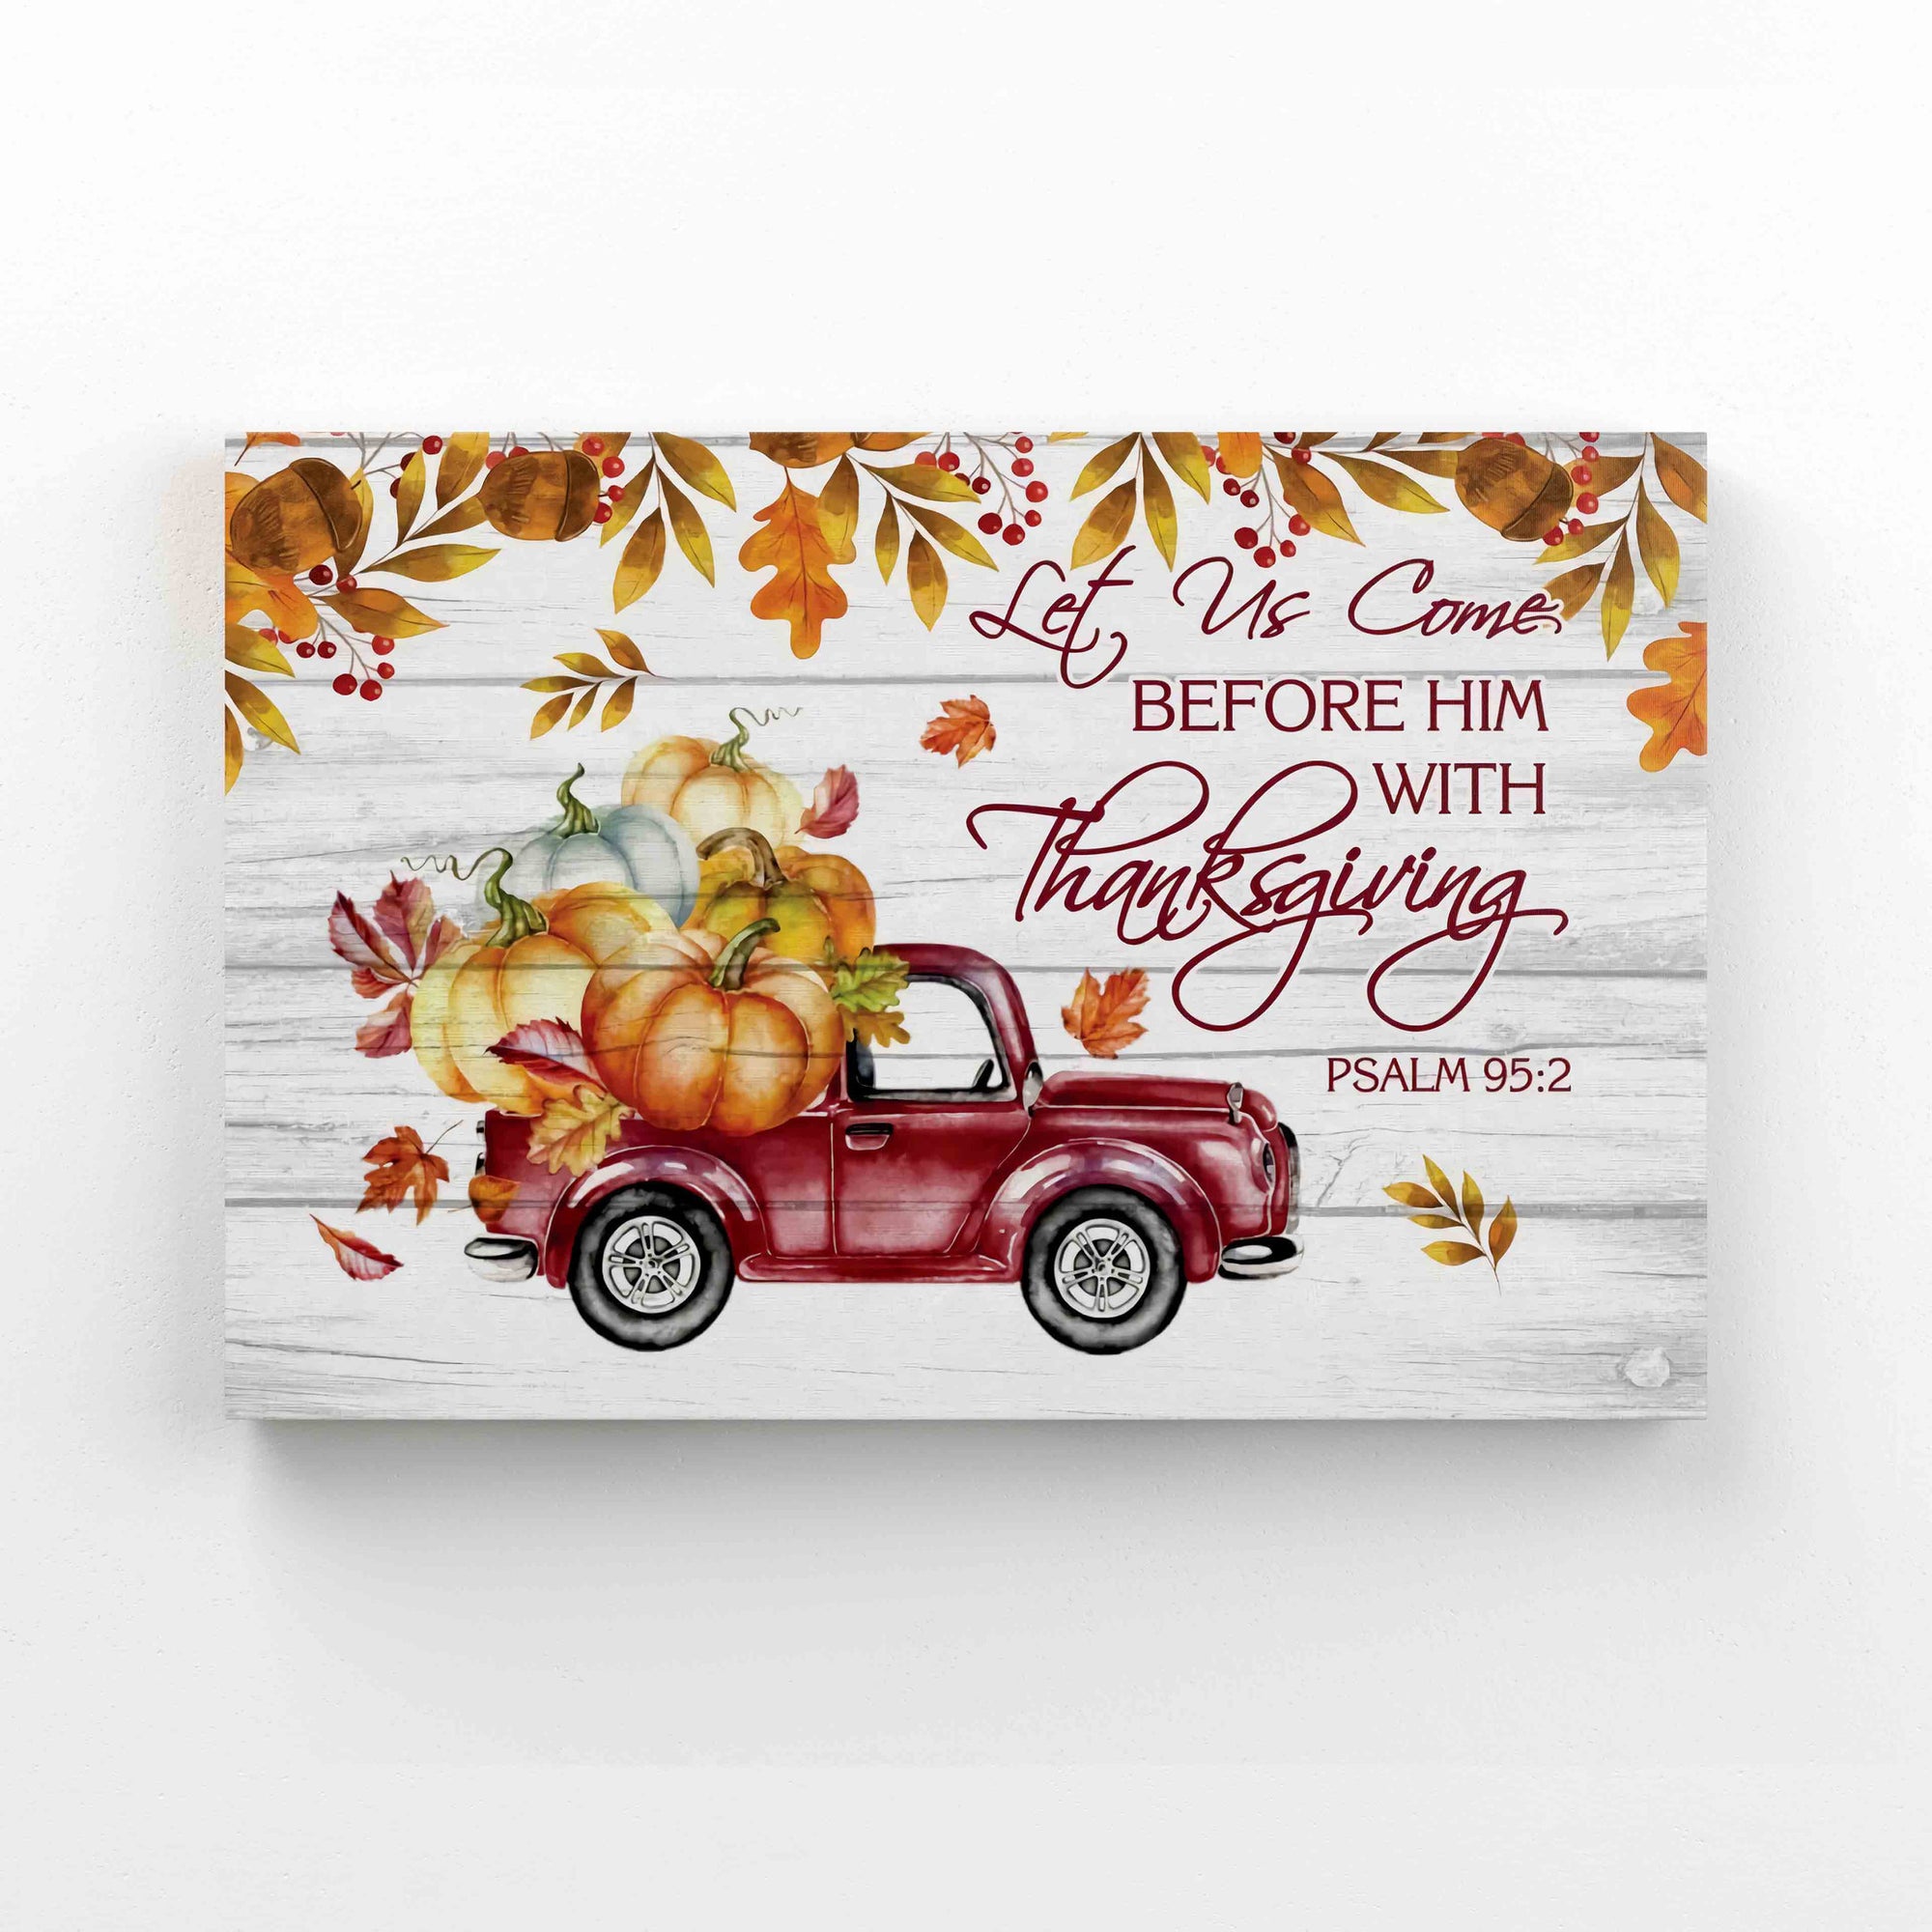 Red Truck Carrying Pumpkin Canvas, Let Us Come Before Him With Thanksgiving Canvas, Thanksgiving Canvas